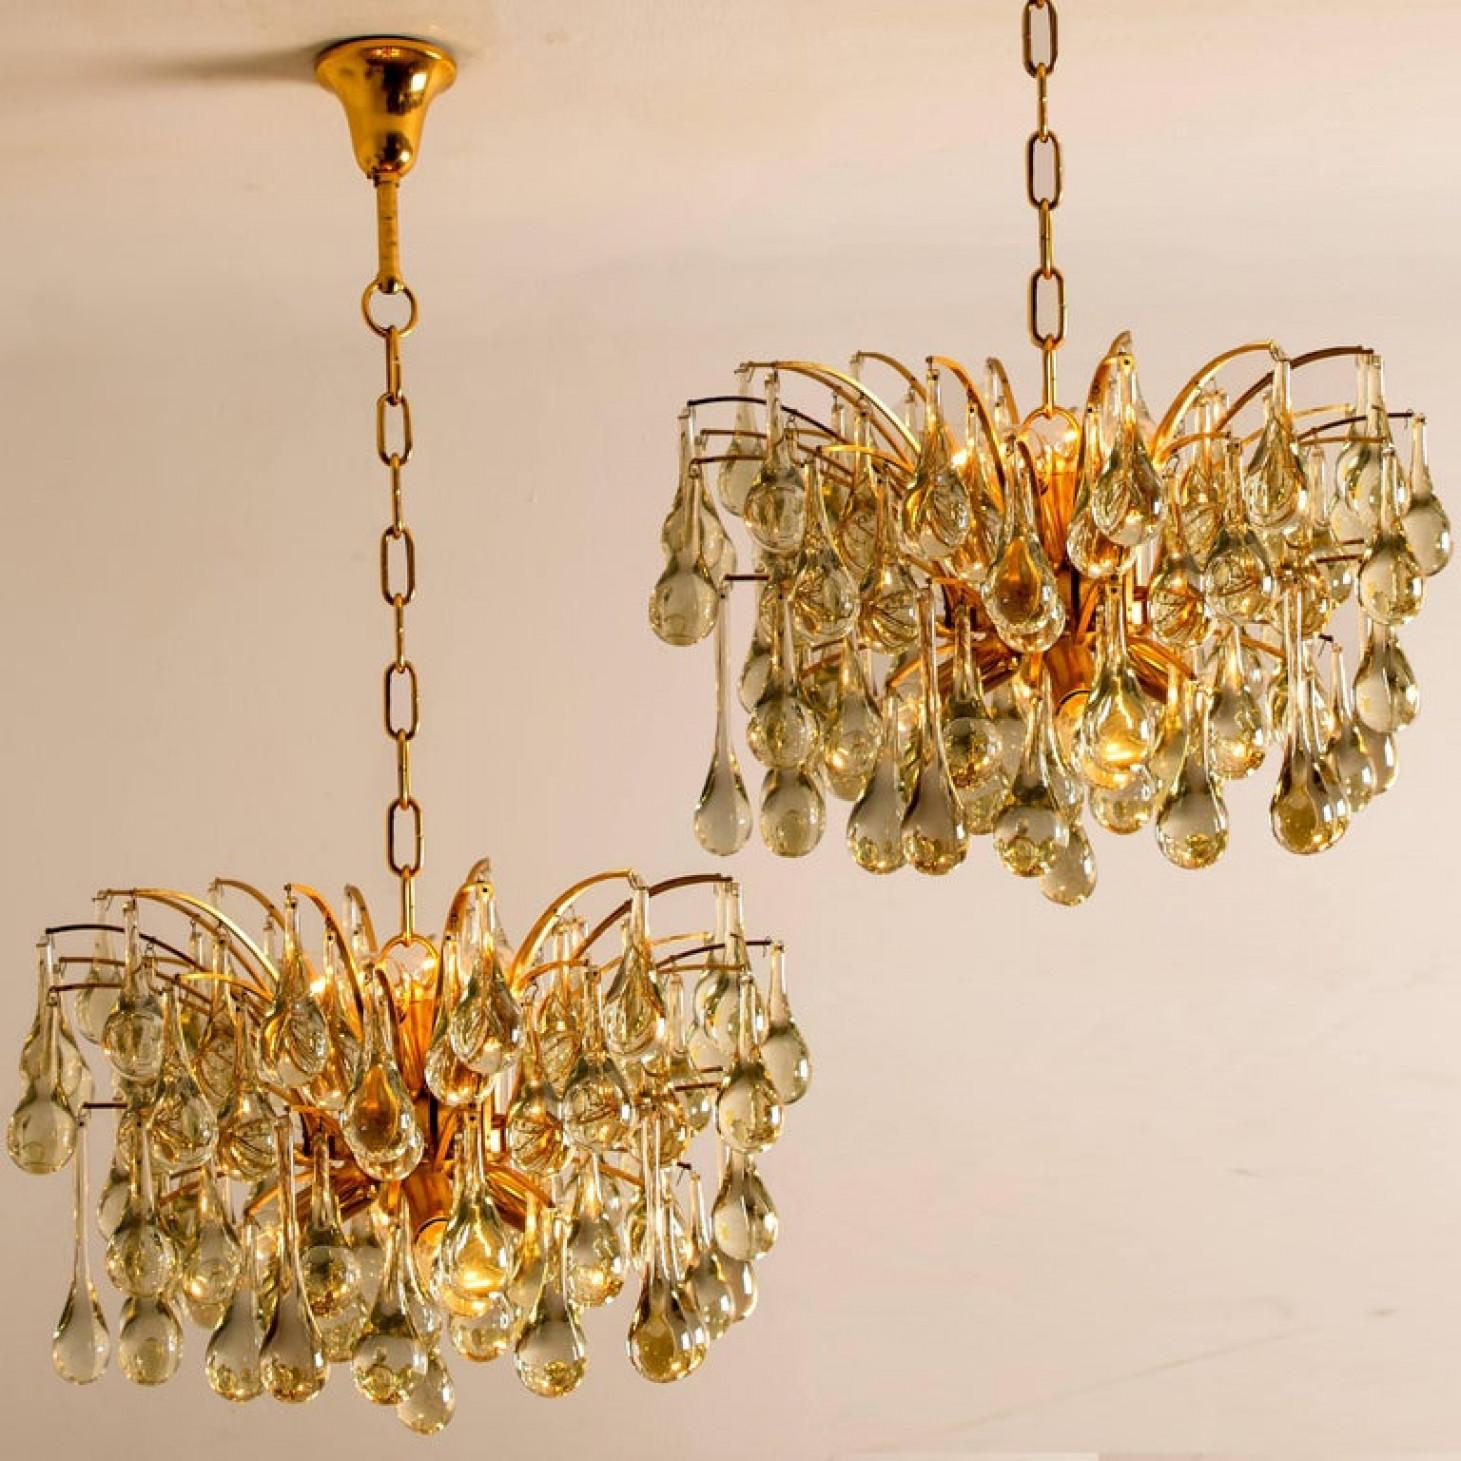 1 of the 2 Large Brass and Crystal Chandeliers, Ernst Palme, Germany, 1970s For Sale 1